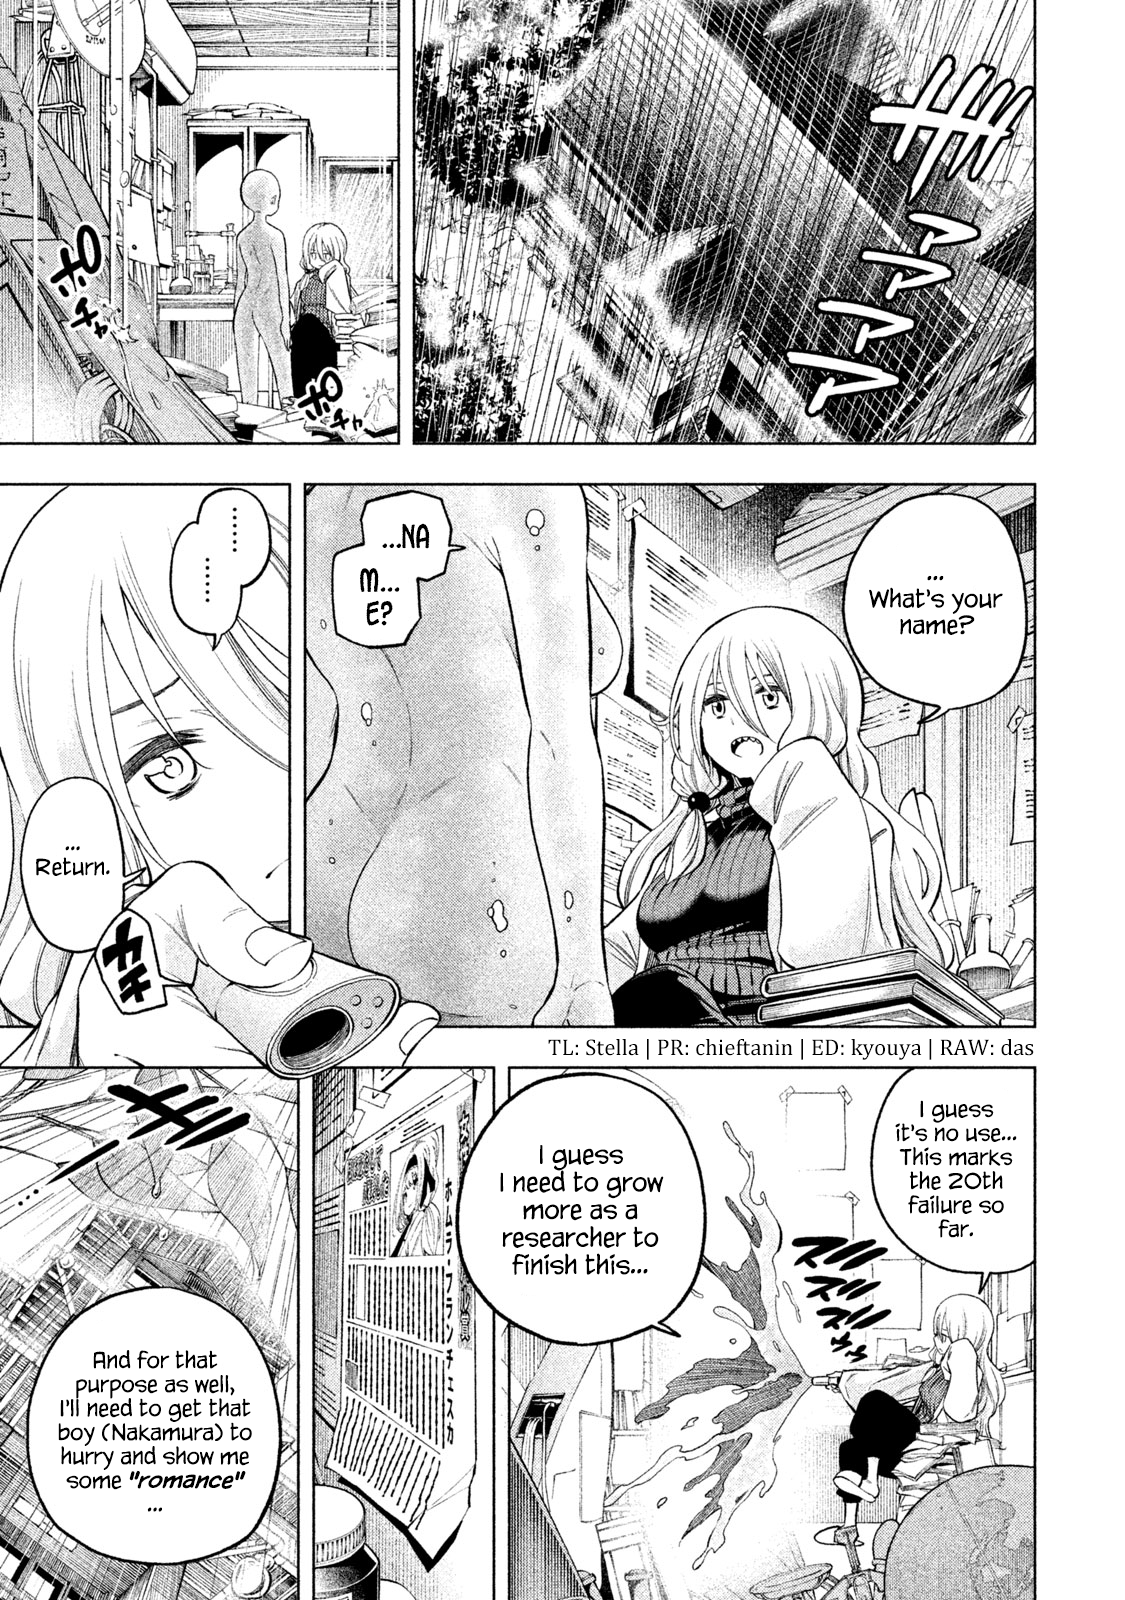 Why Are You Here Sensei!? - Page 1